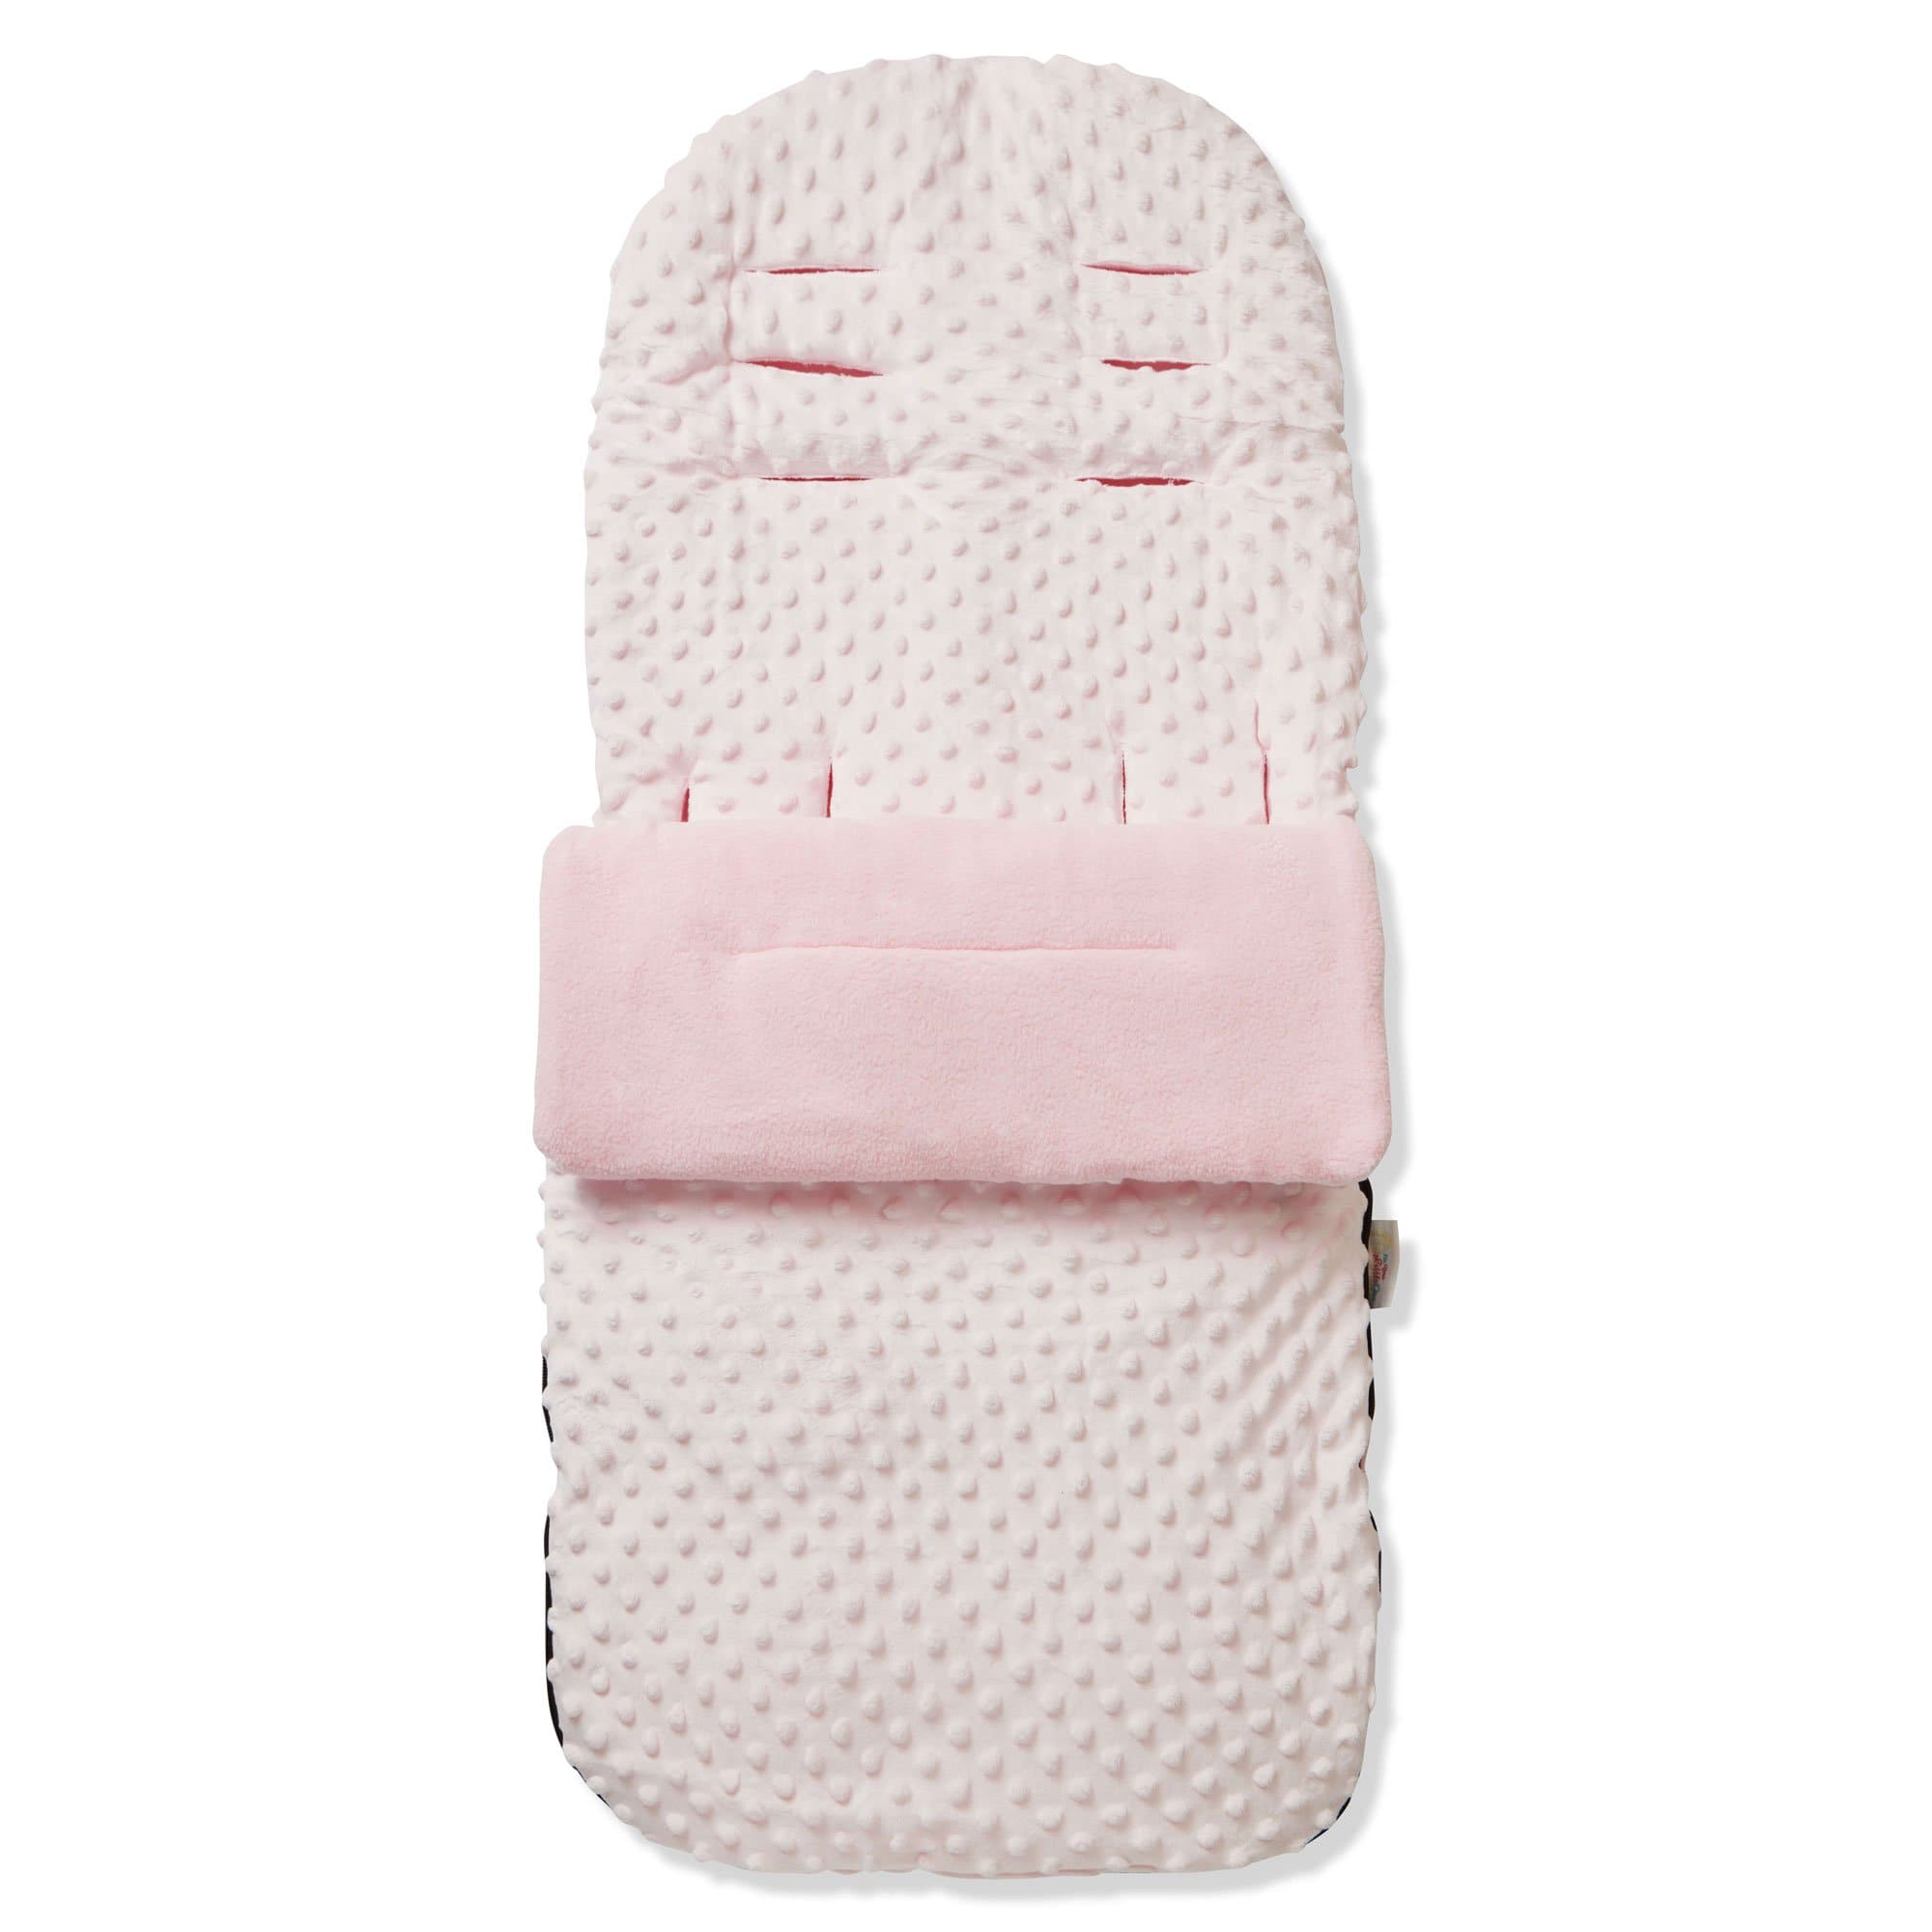 Dimple Footmuff / Cosy Toes Compatible with Bloom - Pink / Fits All Models | For Your Little One